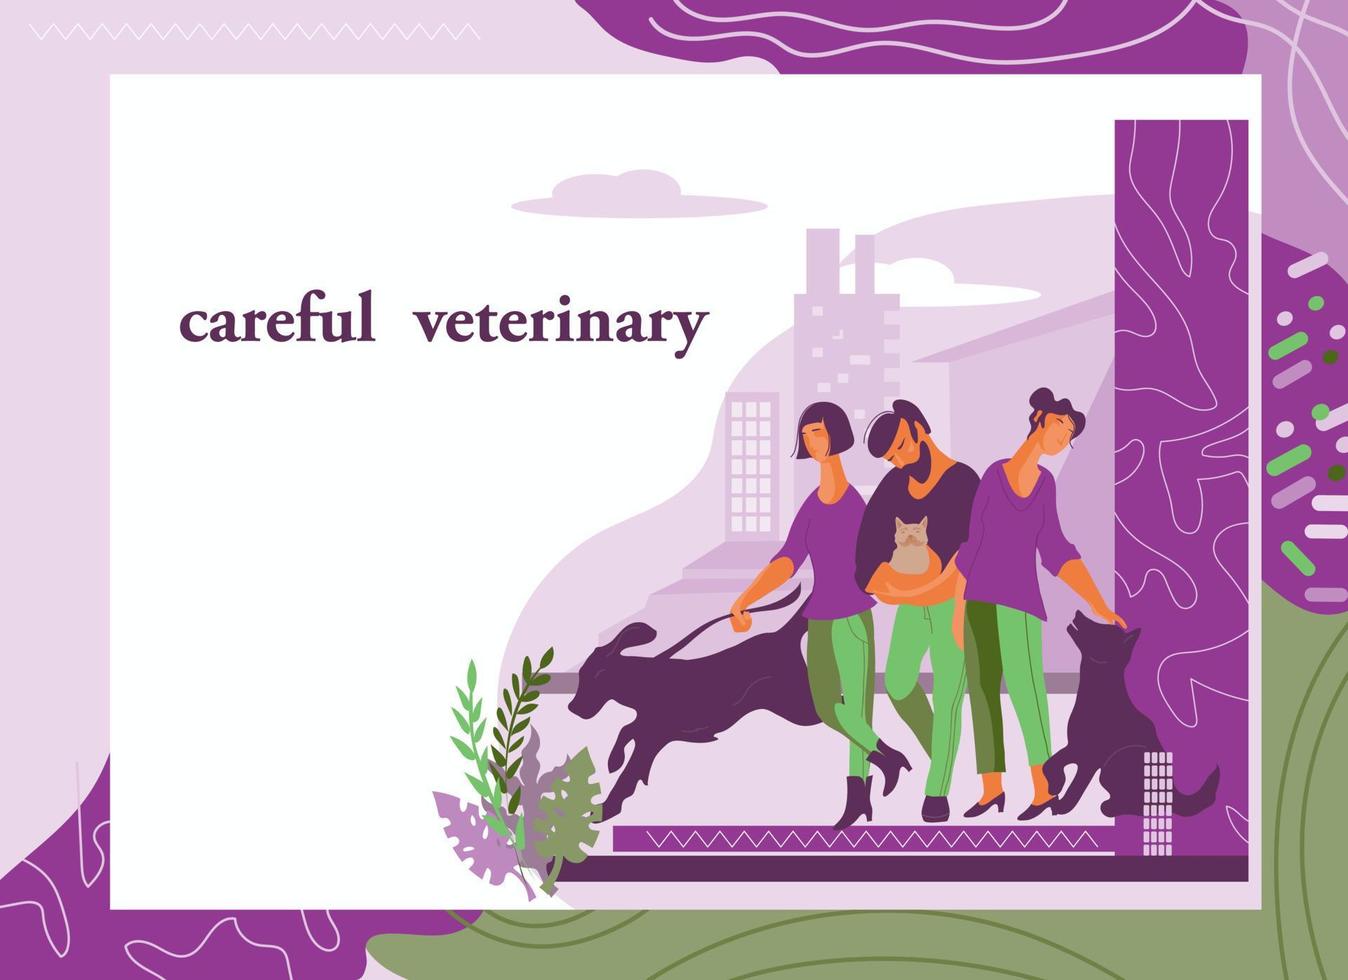 Vet clinic web design for website and landing page with people cartoon characters and pets. Animals care and treatment, veterinary medicine, hospital or pet shop concept. Flat vector illustration.